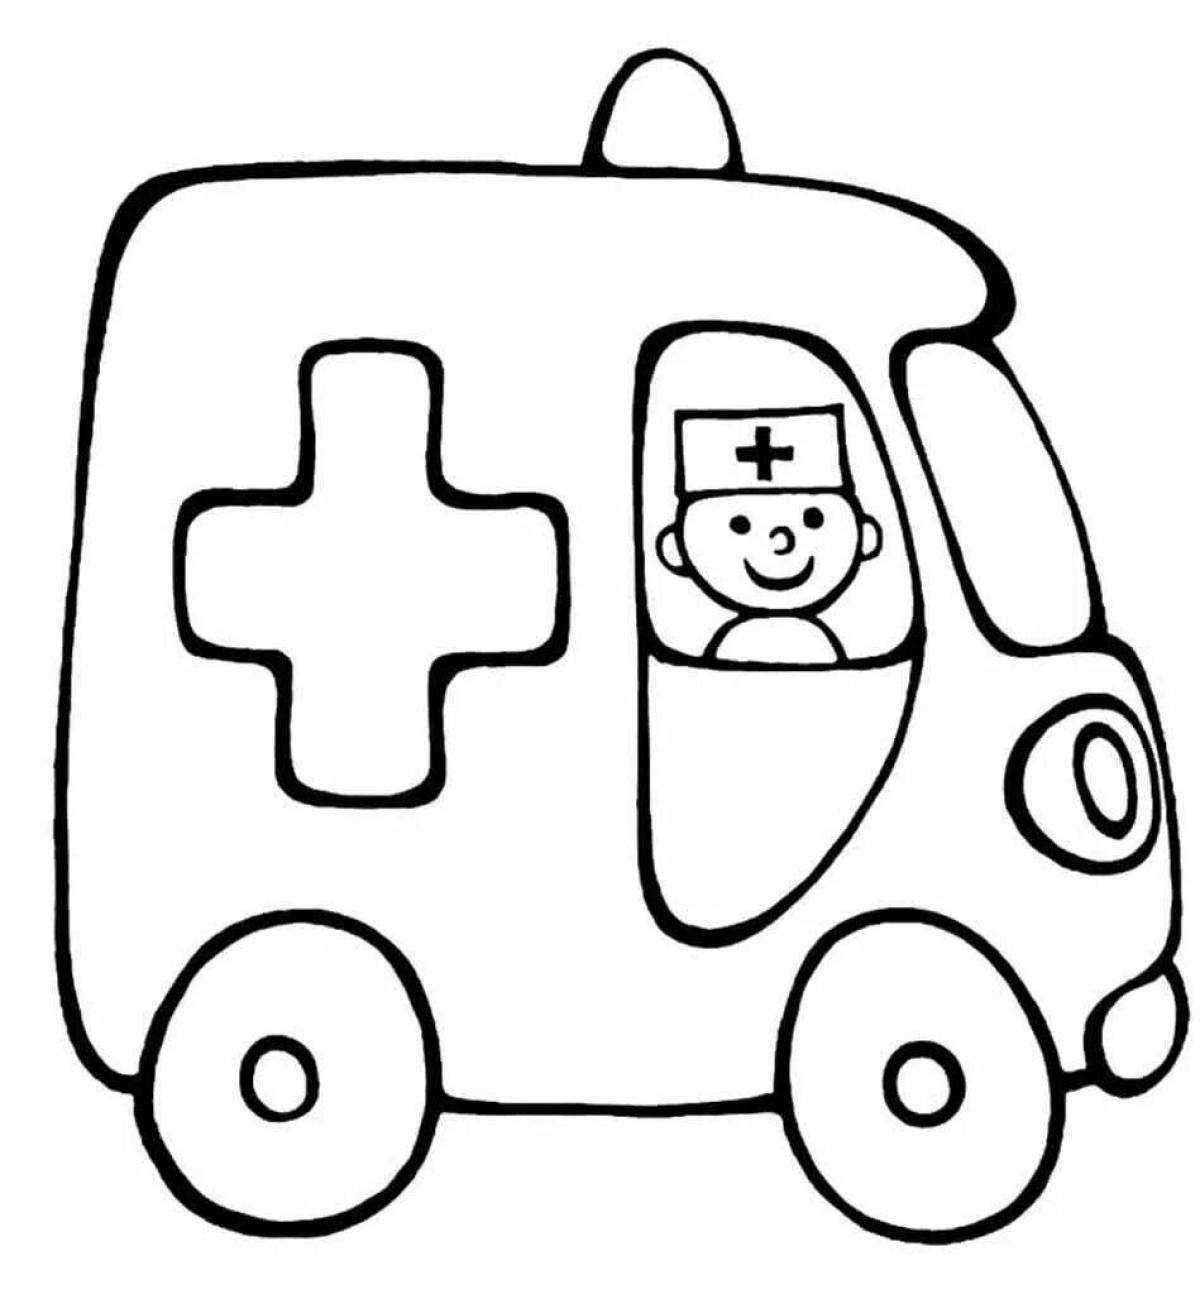 Fabulous ambulance coloring page for 3-4 year olds